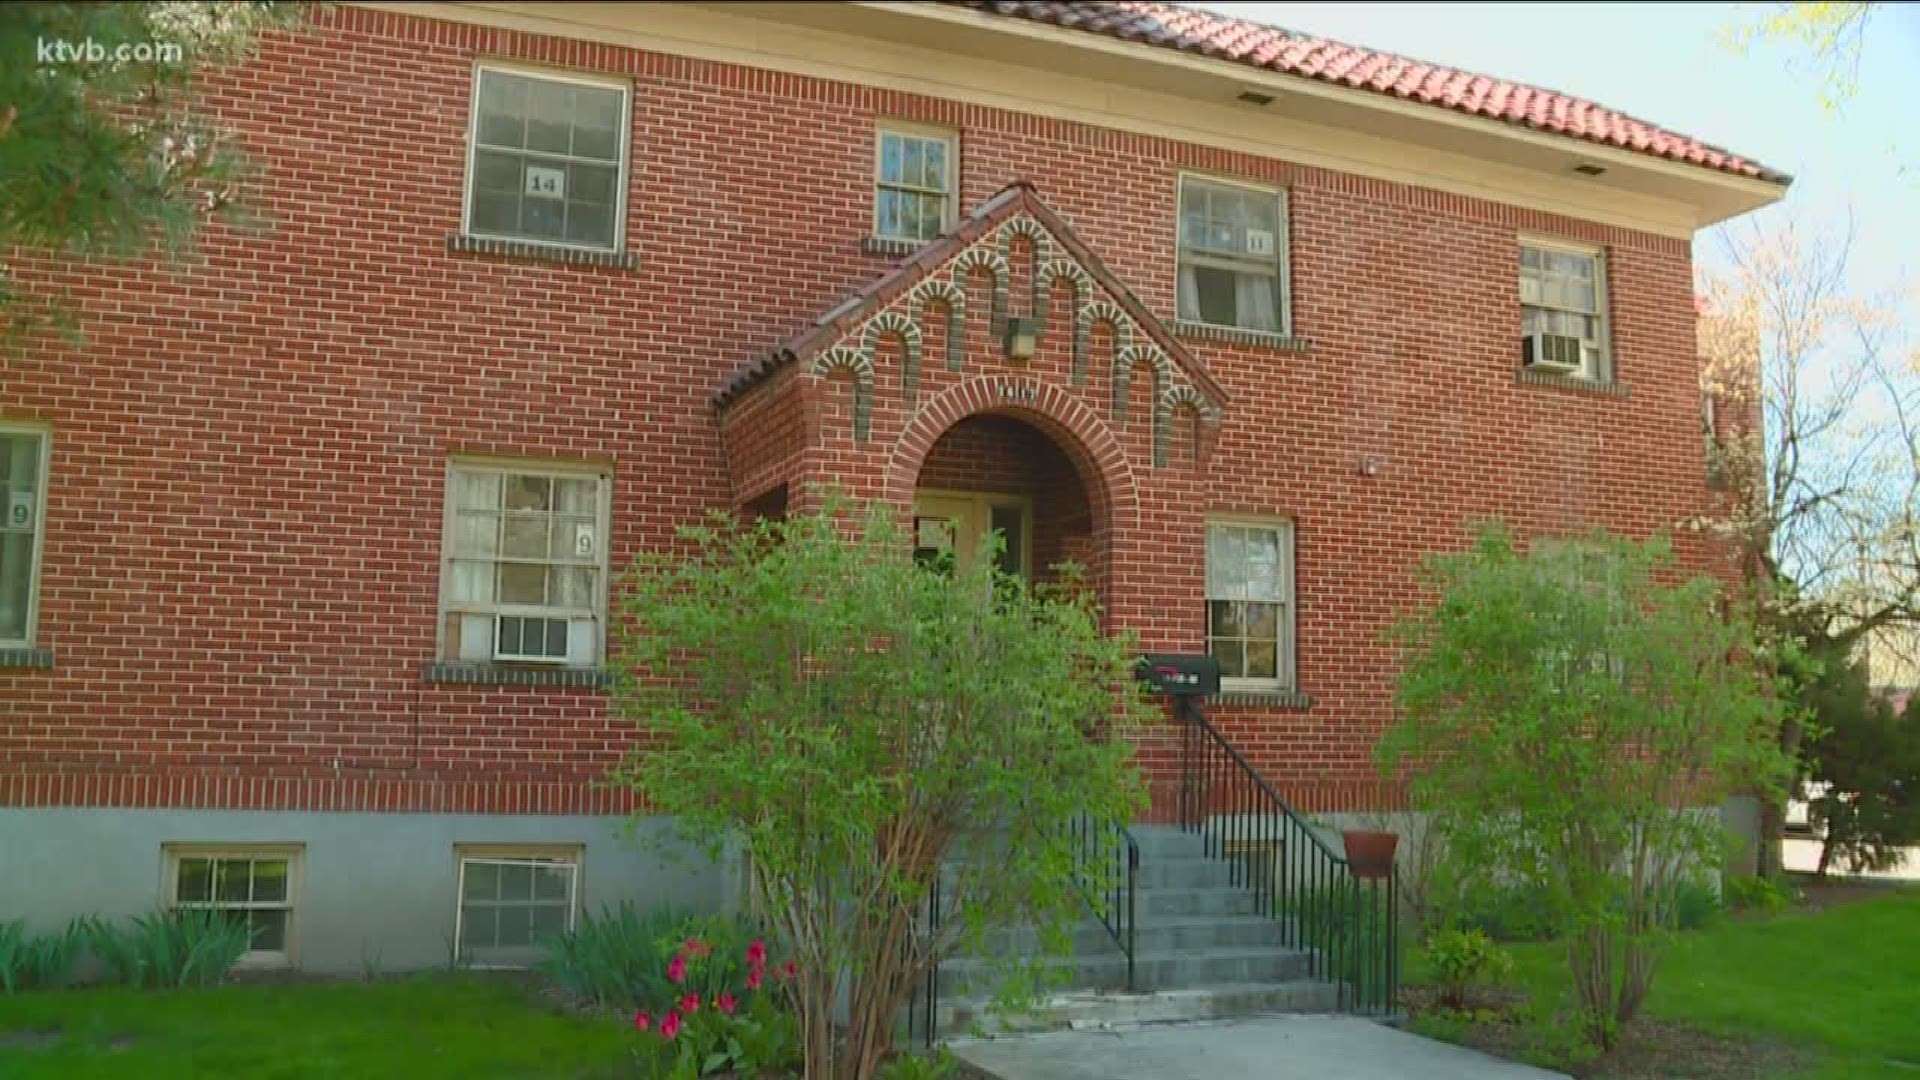 The high school in Boise that serves students who are pregnant or just become mothers is getting ready to relocate this fall.